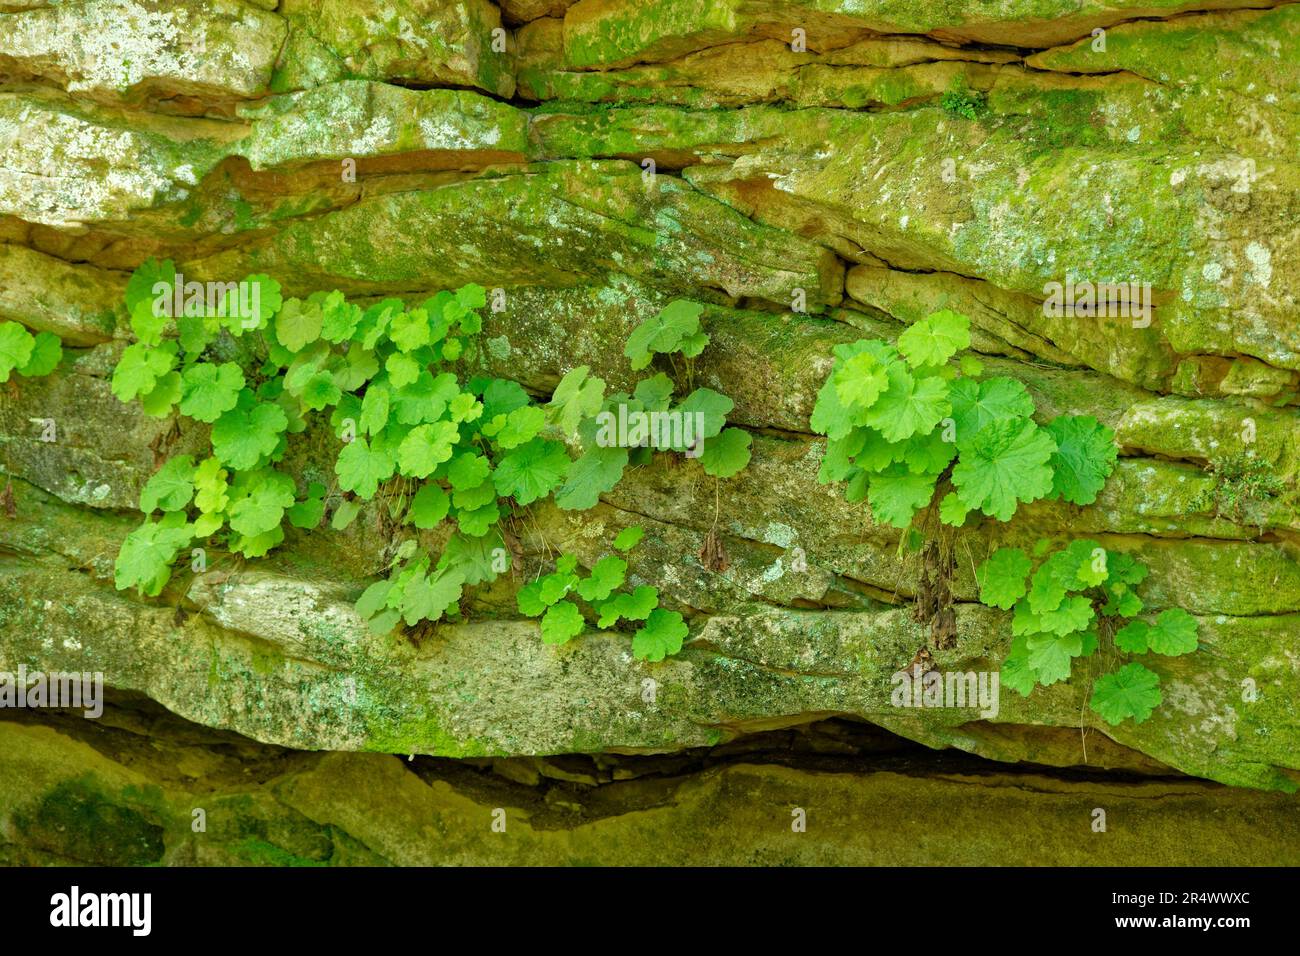 Clusters of alumroot growing in the crevices and cracks of the natural rock wall in the shade in late spring closeup view Stock Photo